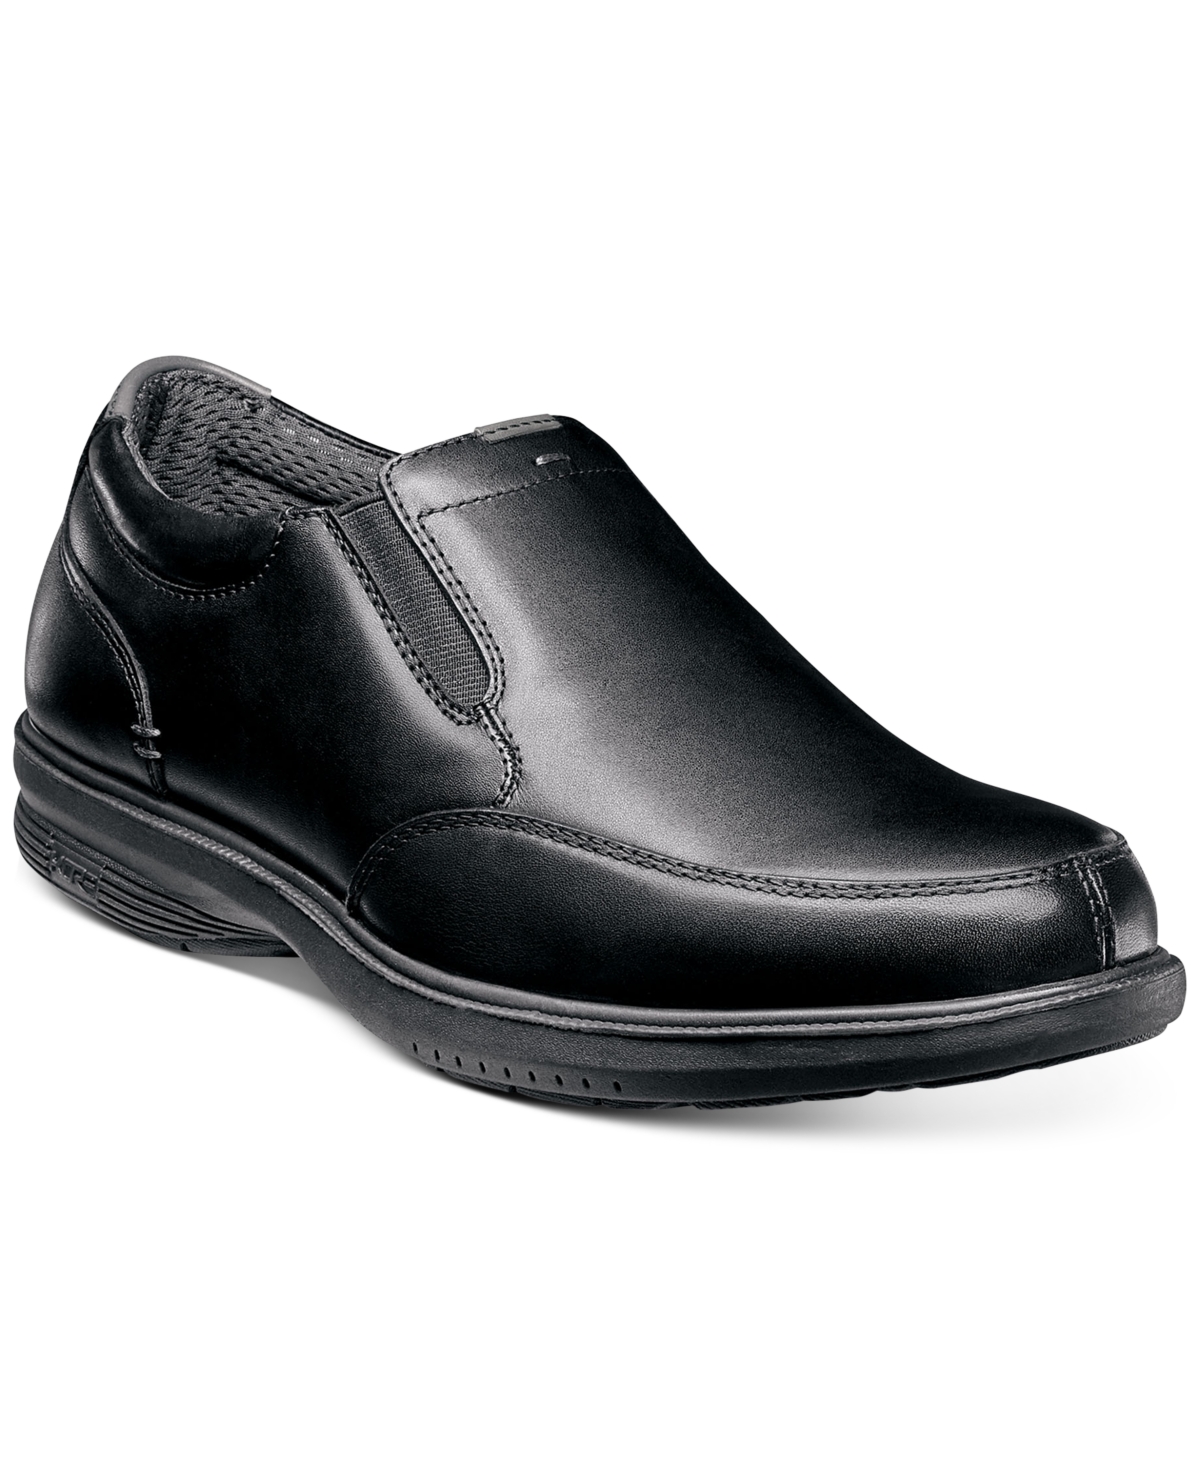 Men's Myles Street Dress Casual Loafers with Kore Comfort Technology - Black